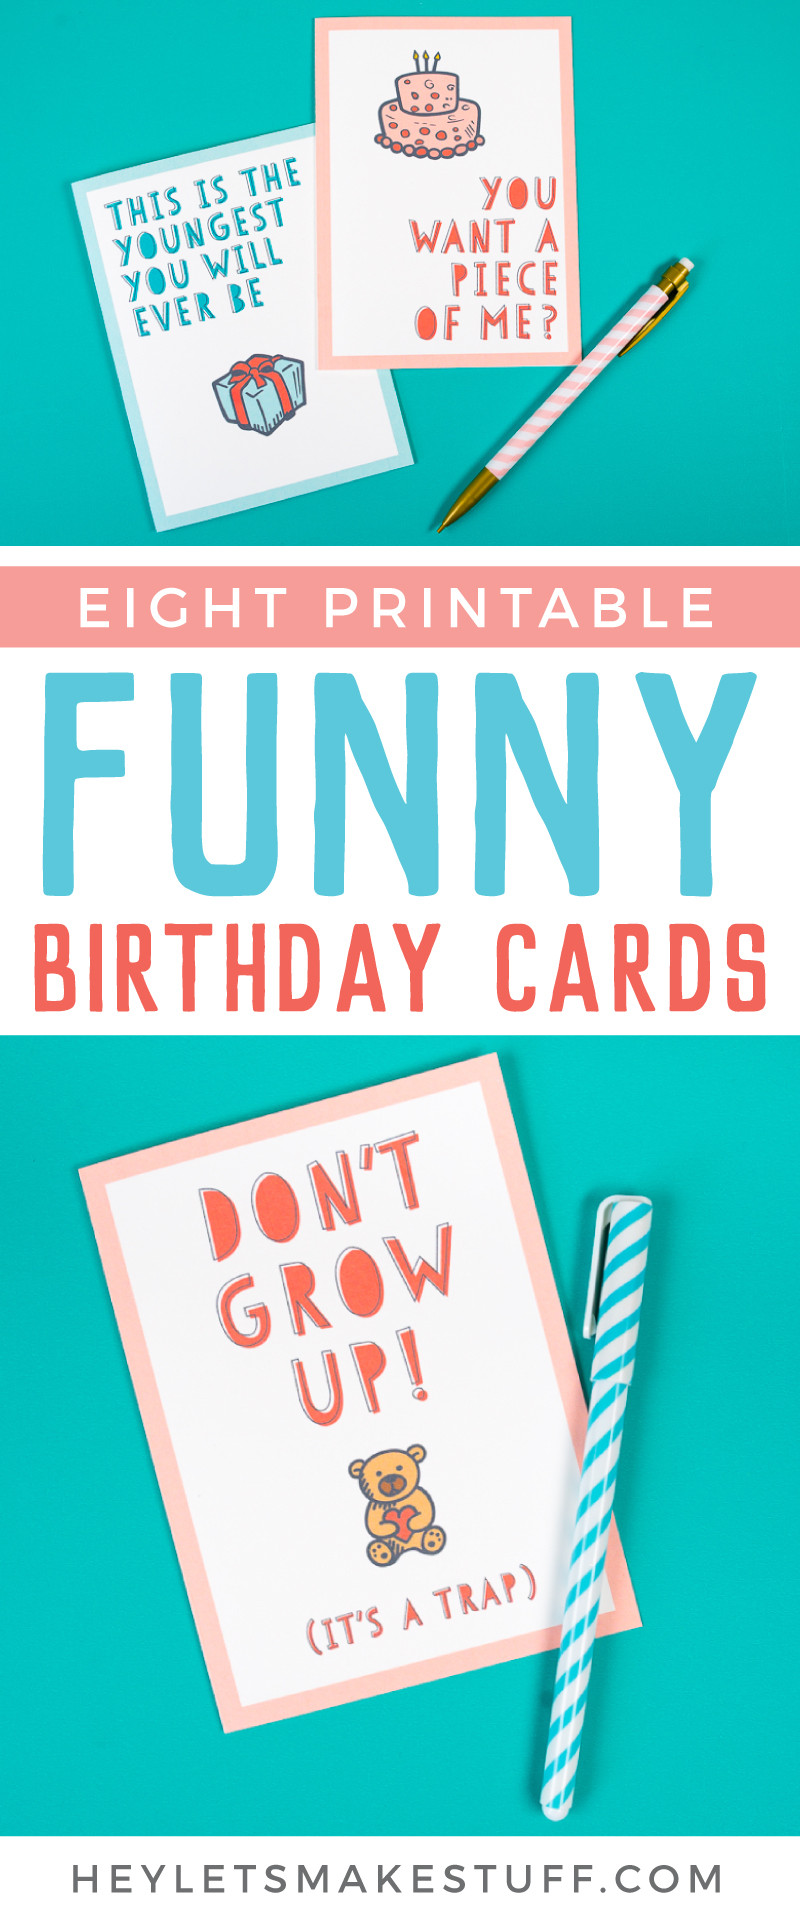 Free Printable Funny Birthday Cards For Adults
 Free Funny Printable Birthday Cards for Adults Eight